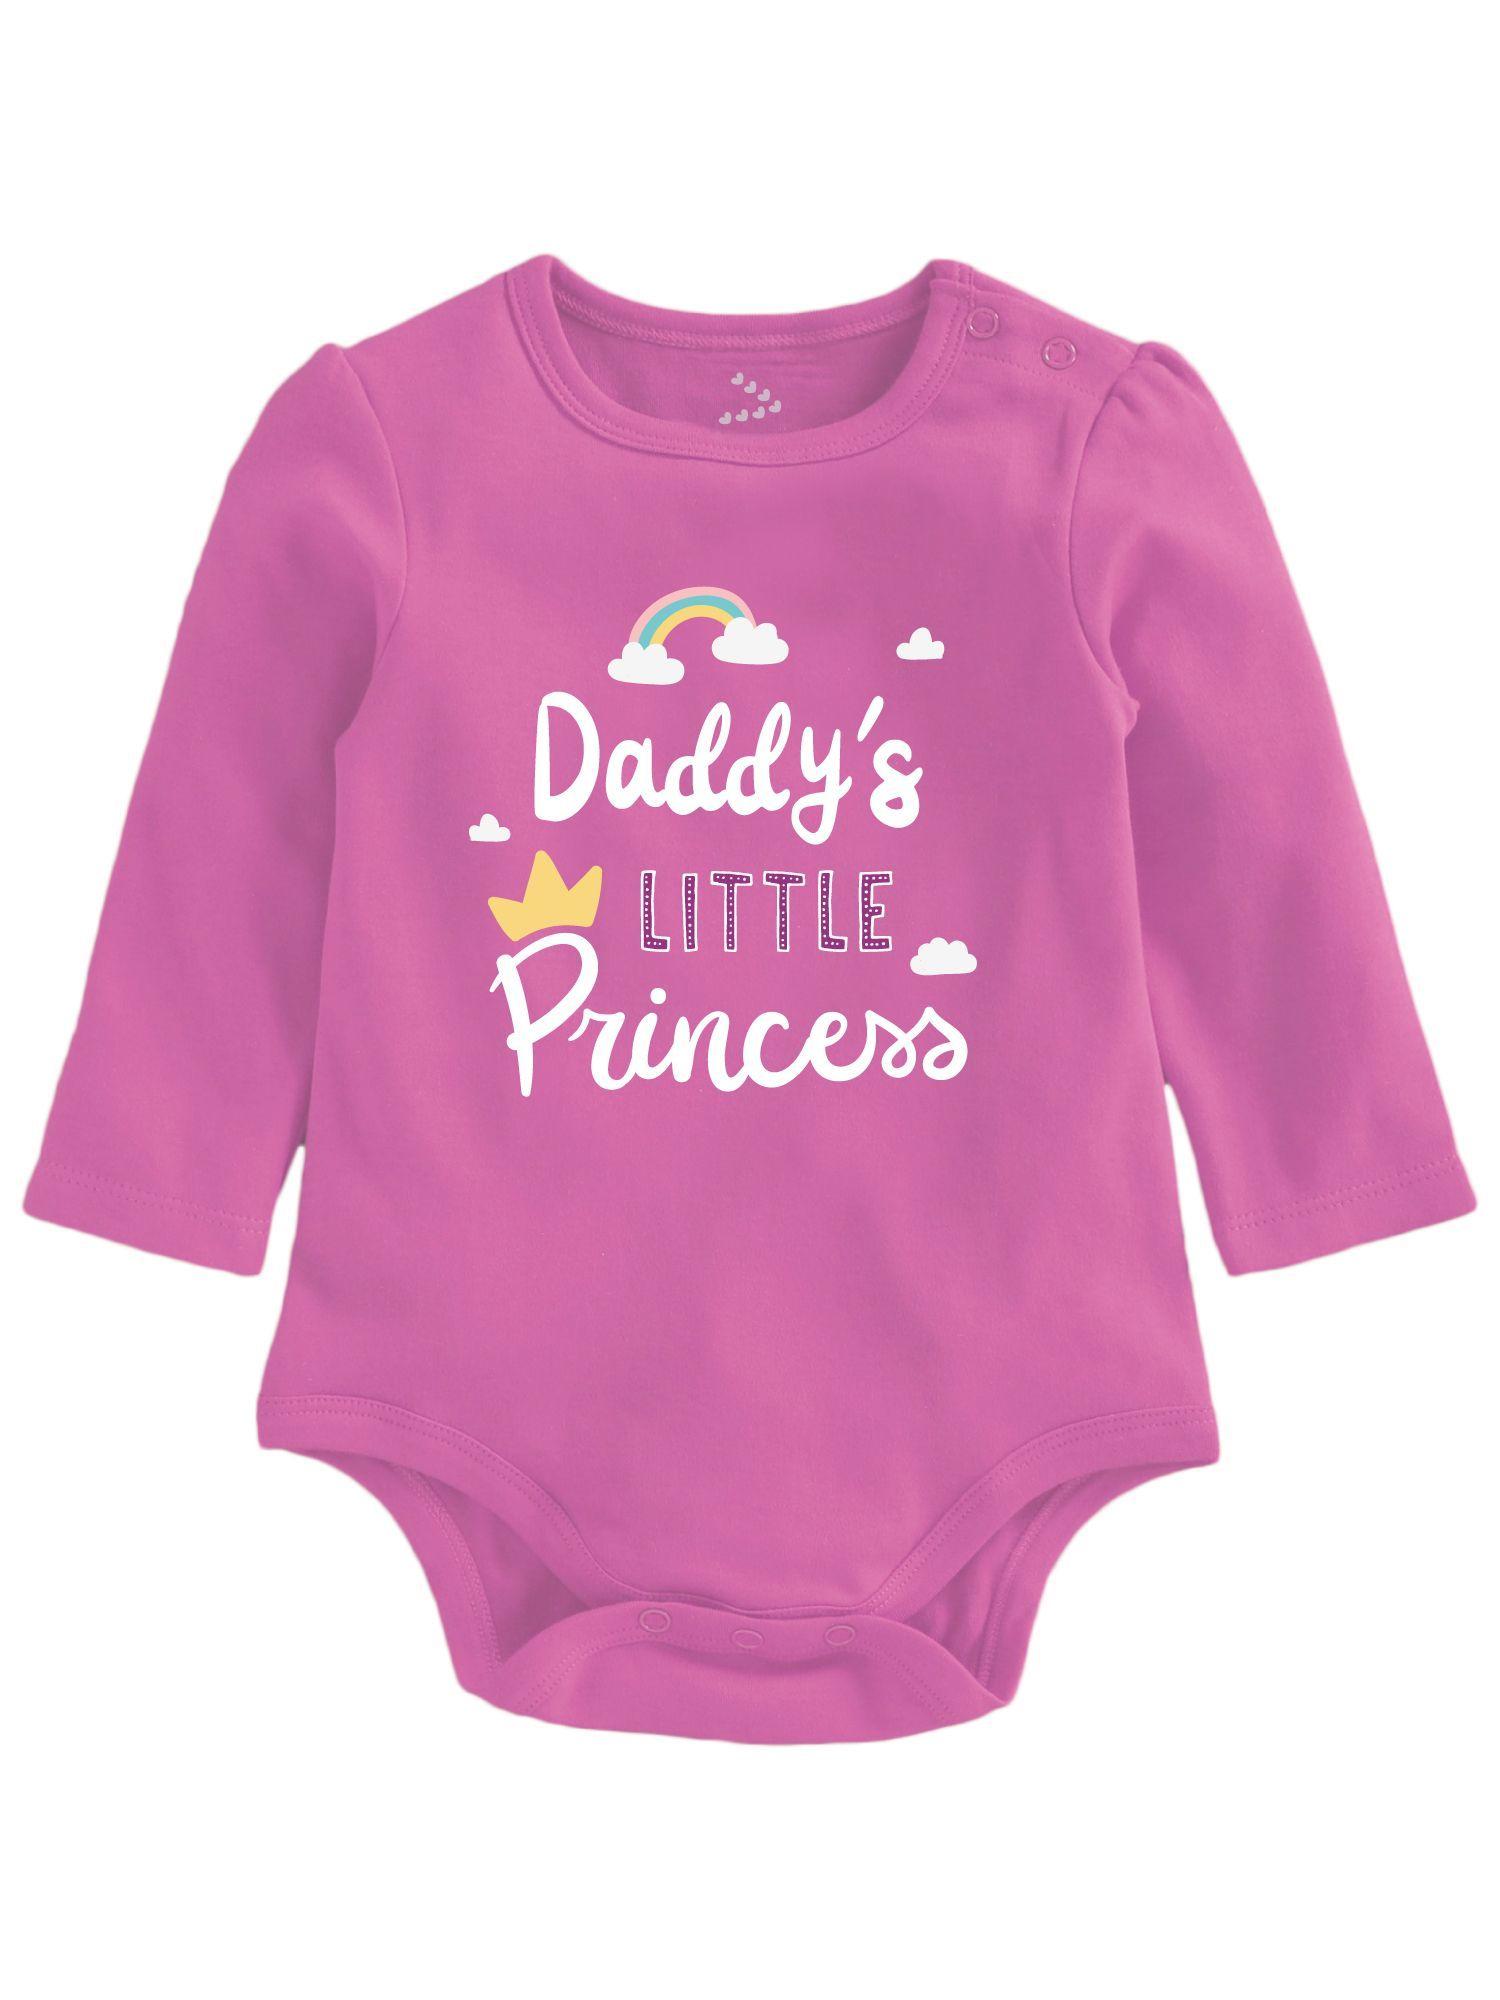 daddys-little-princess-newborn-baby-romper-father-&-baby-girl-theme